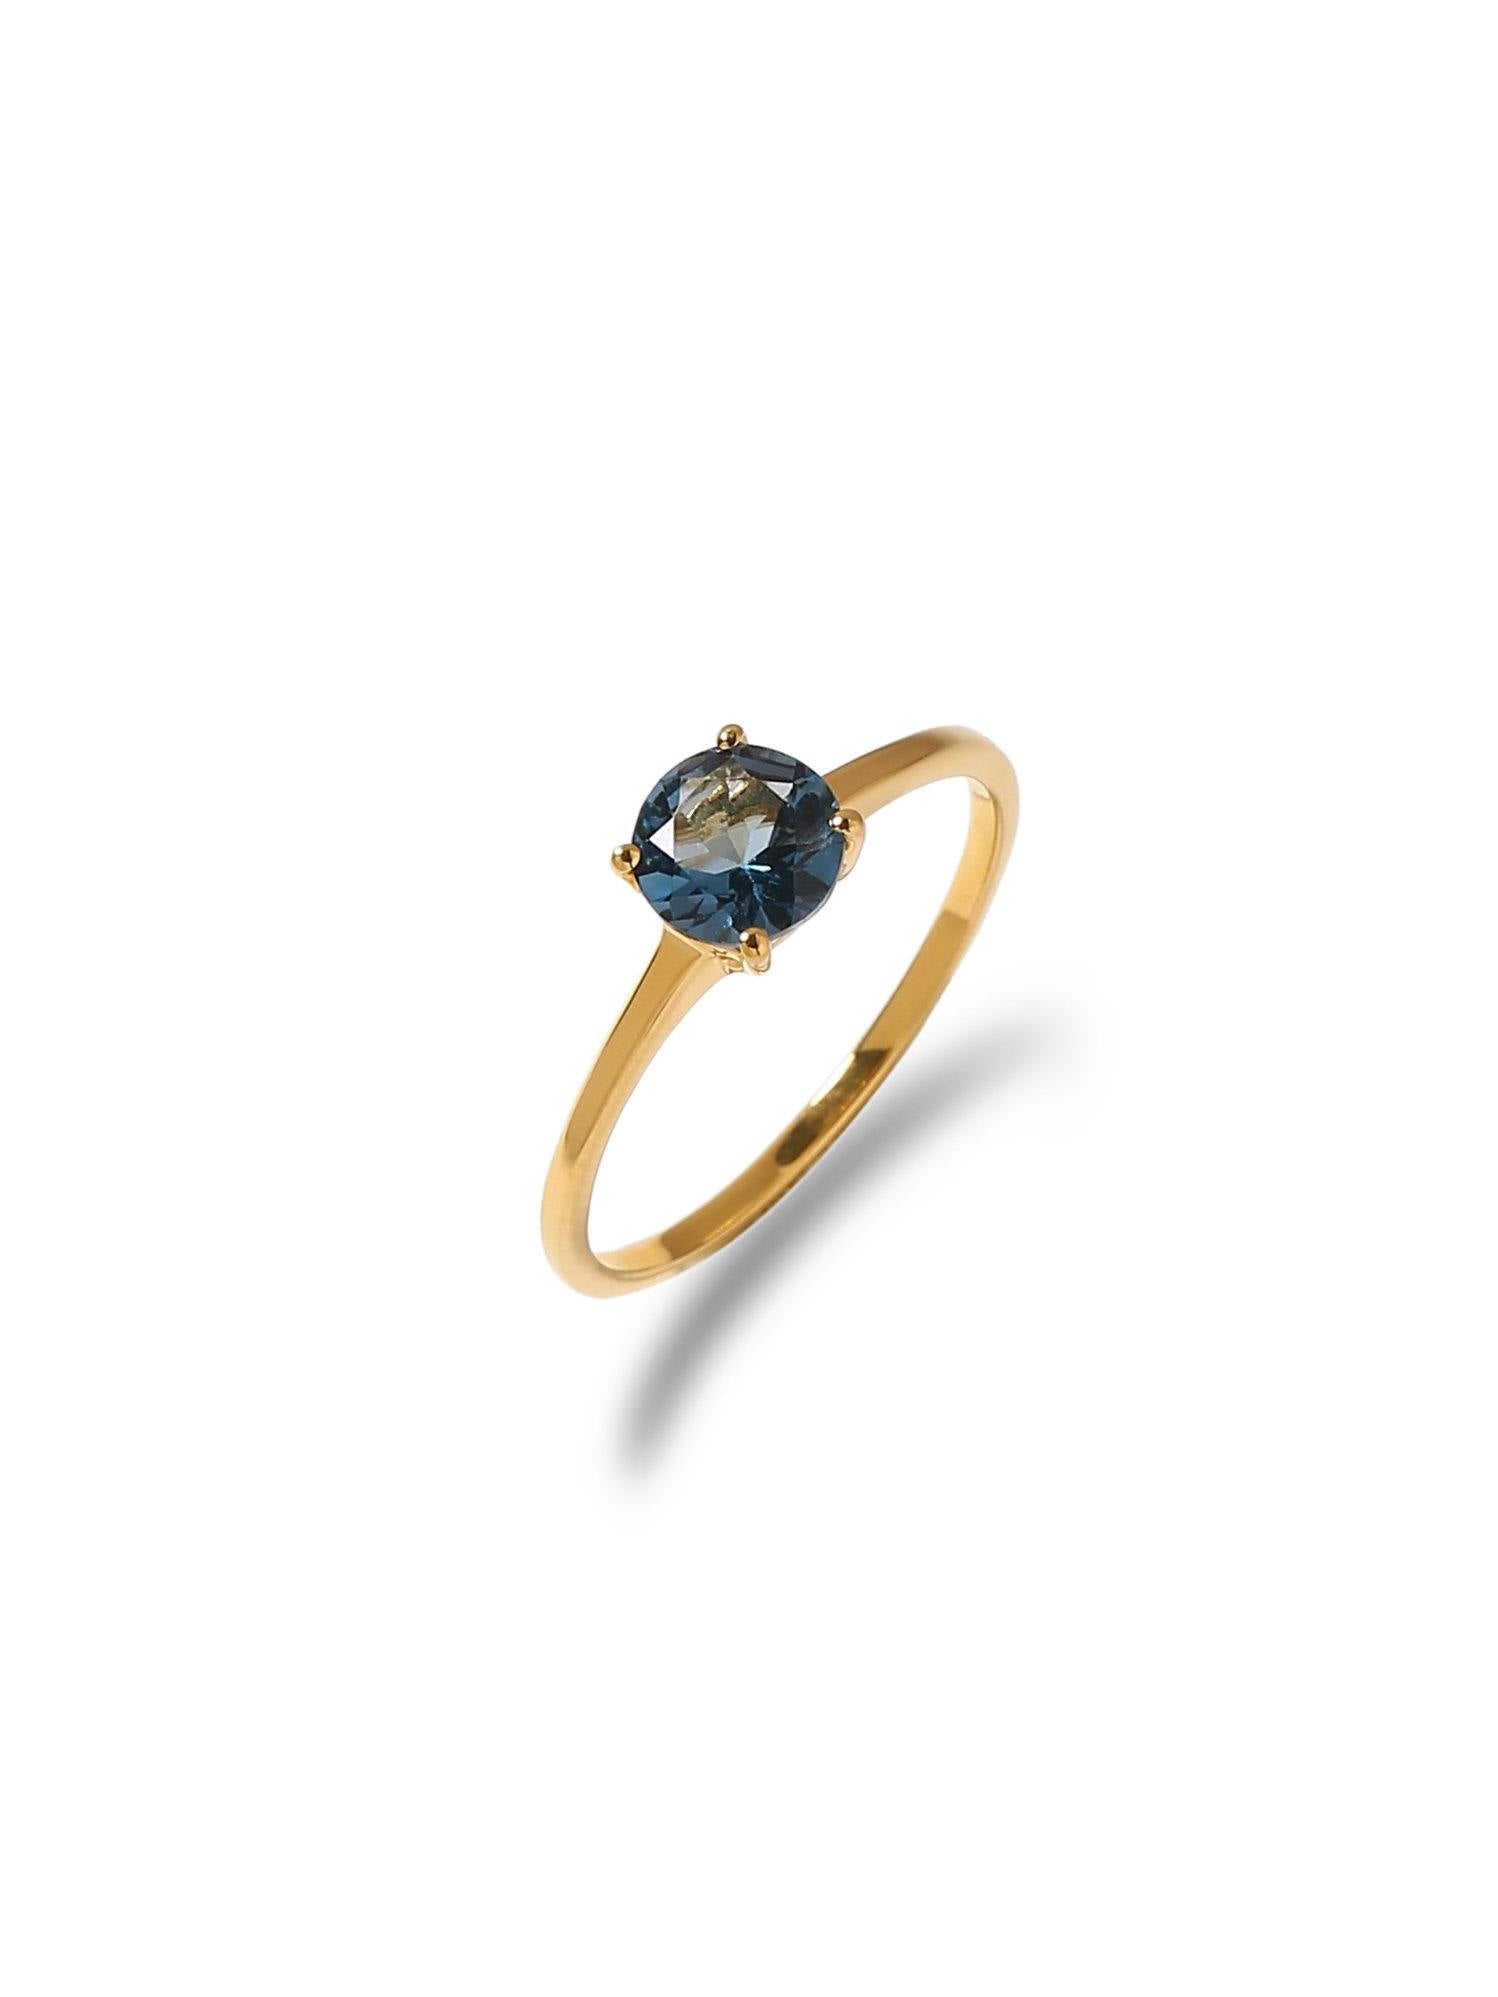 0.96 Ct London Blue Topaz Solid 10k Yellow Gold Solitaire Ring Jewelry - YoTreasure